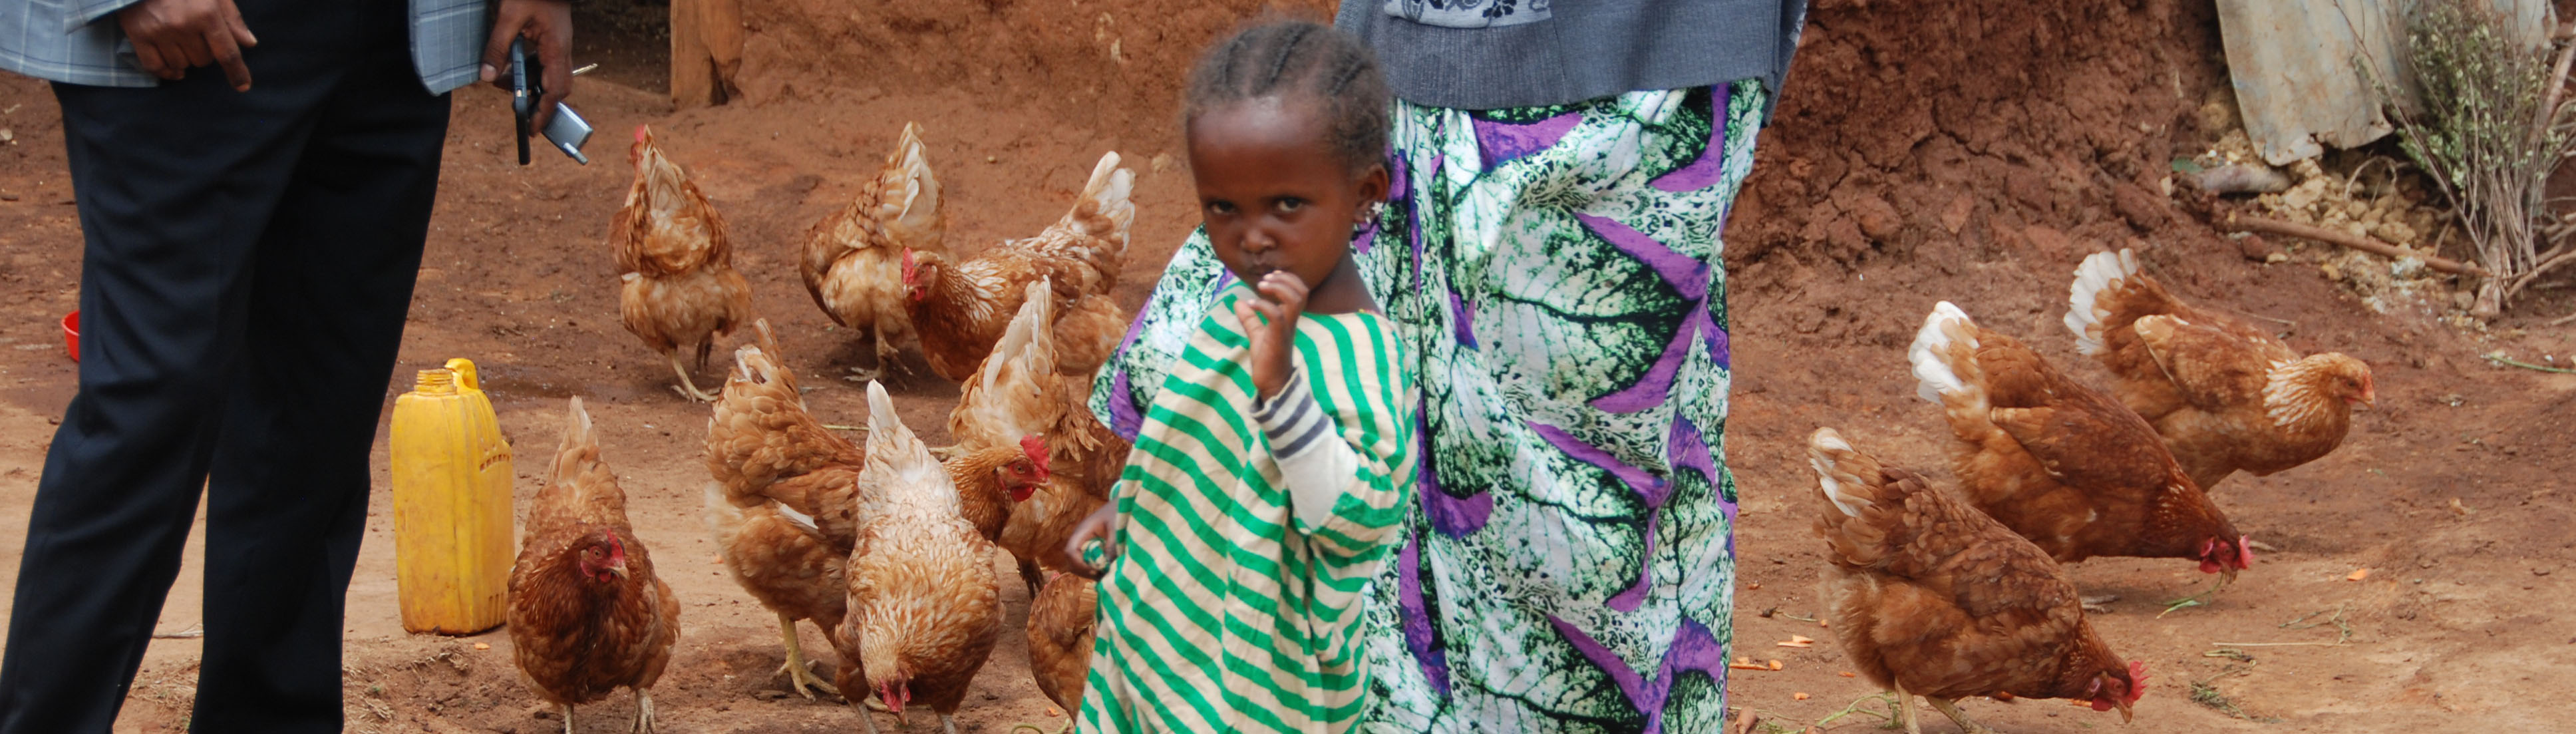 Ethiopian girl with chickens